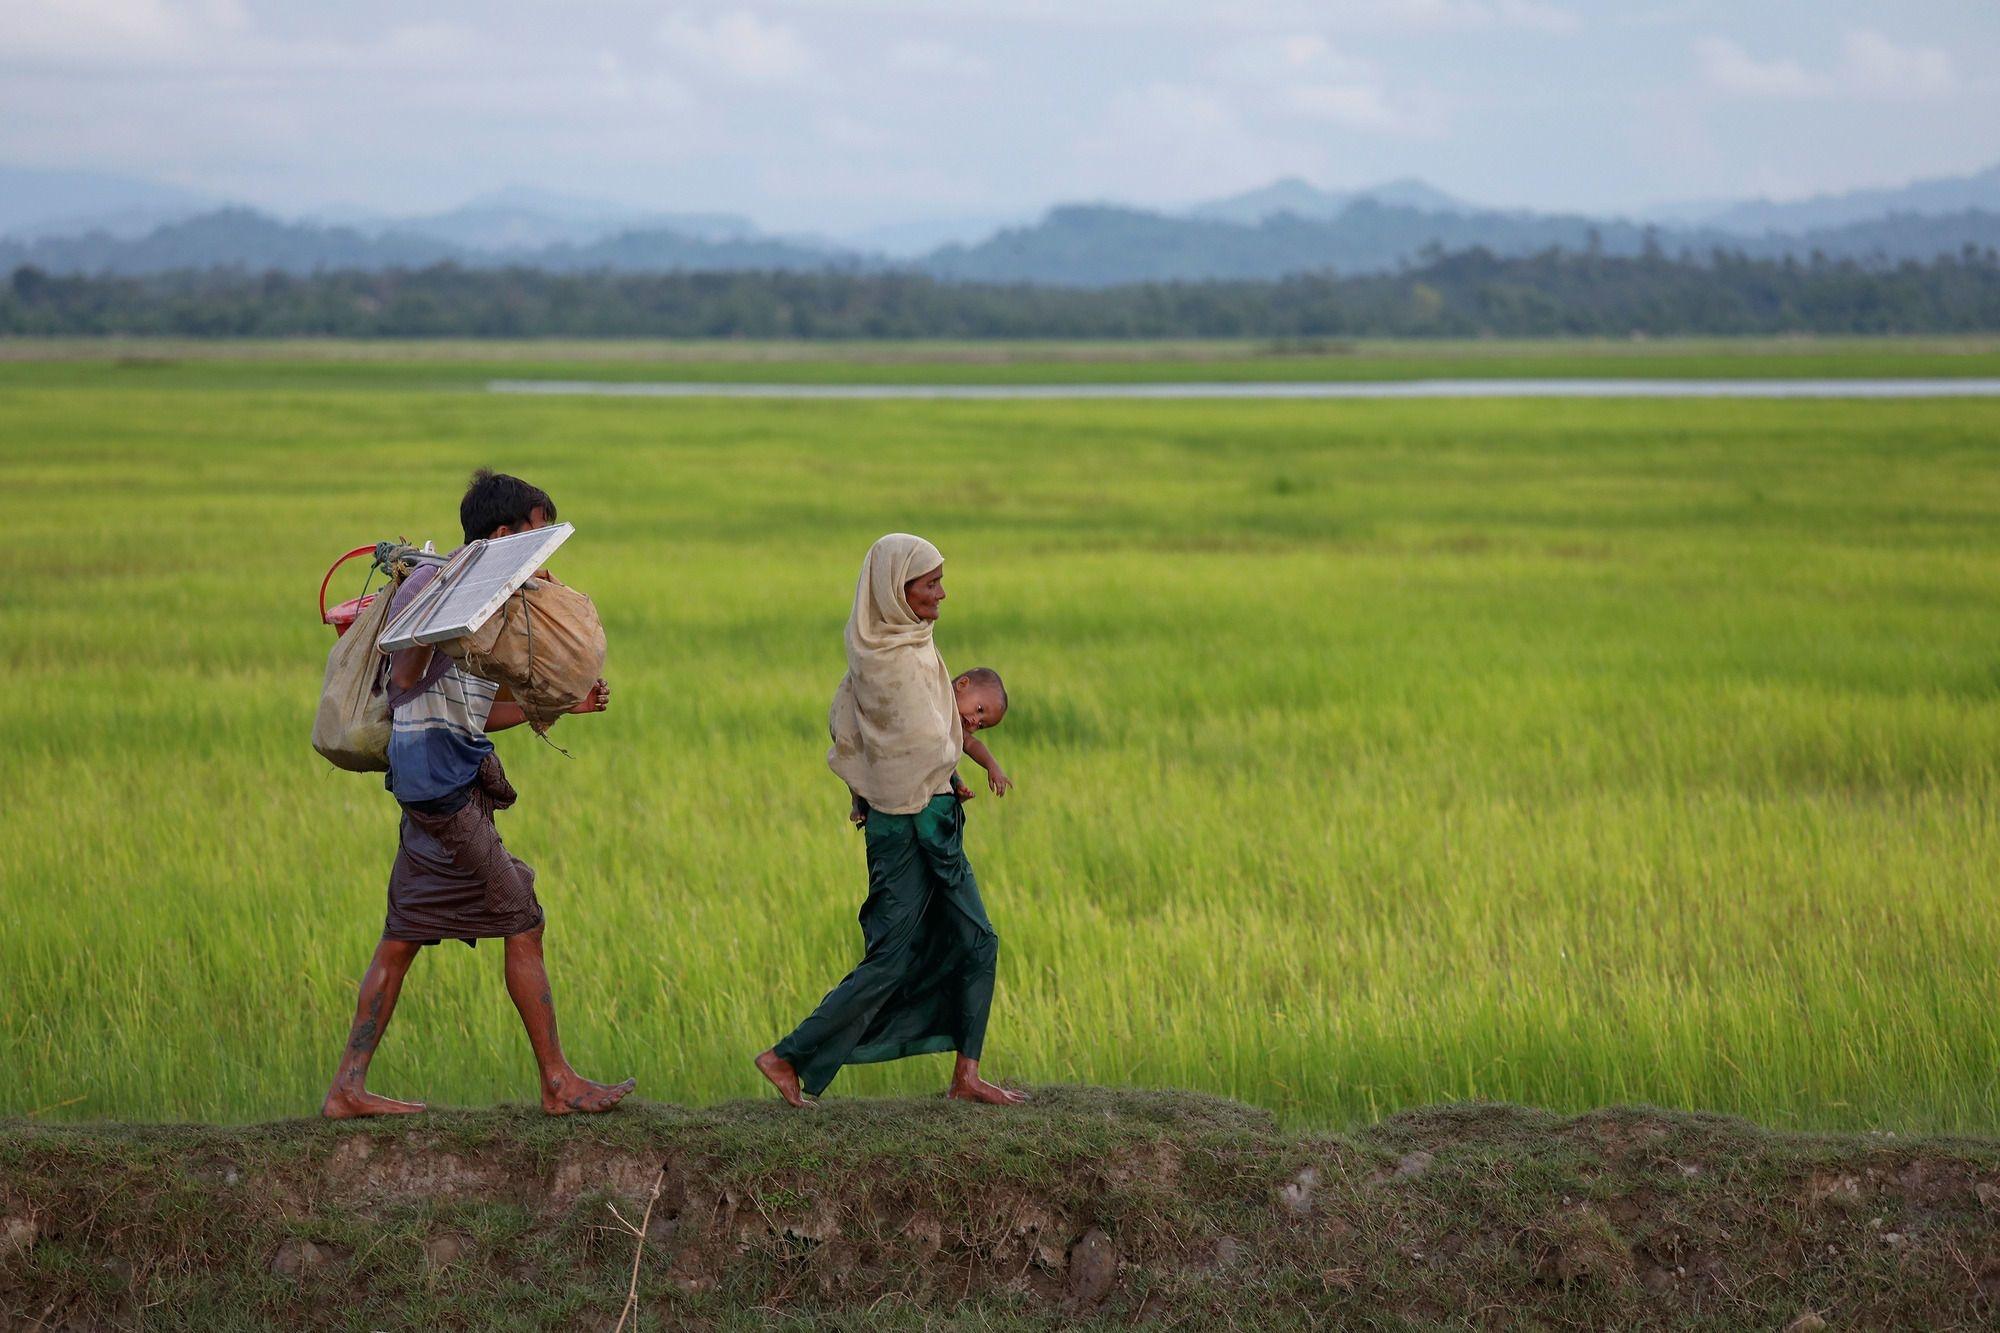 Rohingya refugees who fled from Myanmar make their way through the rice field after crossing the border in Palang Khali, Bangladesh October 9, 2017. REUTERS/Damir Sagolj - RC13A1FAEBD0